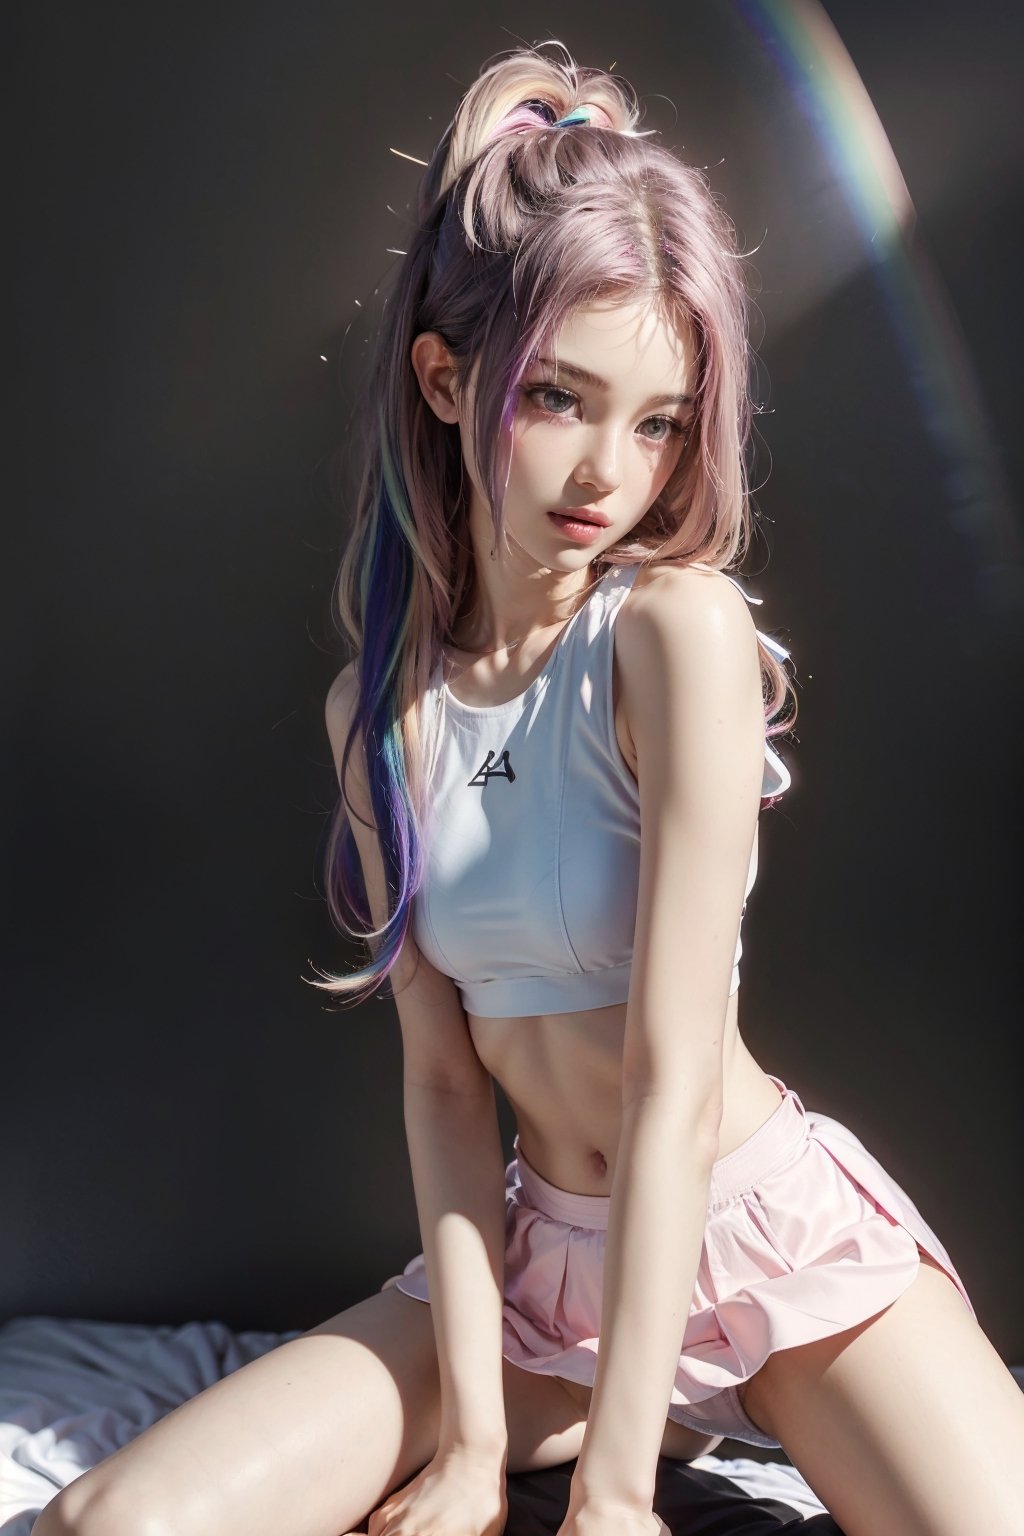 a 30 yo woman, ((long_wave_hair)), (hi-top fade:1.3), soothing tones, muted colors, high contrast, (natural skin texture, hyperrealism, soft light, sharp),a girl, solo, highly detailed beautiful face and eyes,(((Rainbow hair))), detailed skin texture, textured skin, realistic dull skin noise, visible skin detail, skin fuzz, glossy skin, petite, (white gradation hair),light pinklong hair,
nsfw, (front focus:1.4), hetero,(straddling:1.3), alluring move, exposed sex drive, mouth_open, ((tube_top)),((without_panty)),((tennis_skirt)), jwy1,realhands,(waist_shot),aespakarina,karinalorashy,yujinlorashy,goyoonjung,danielle